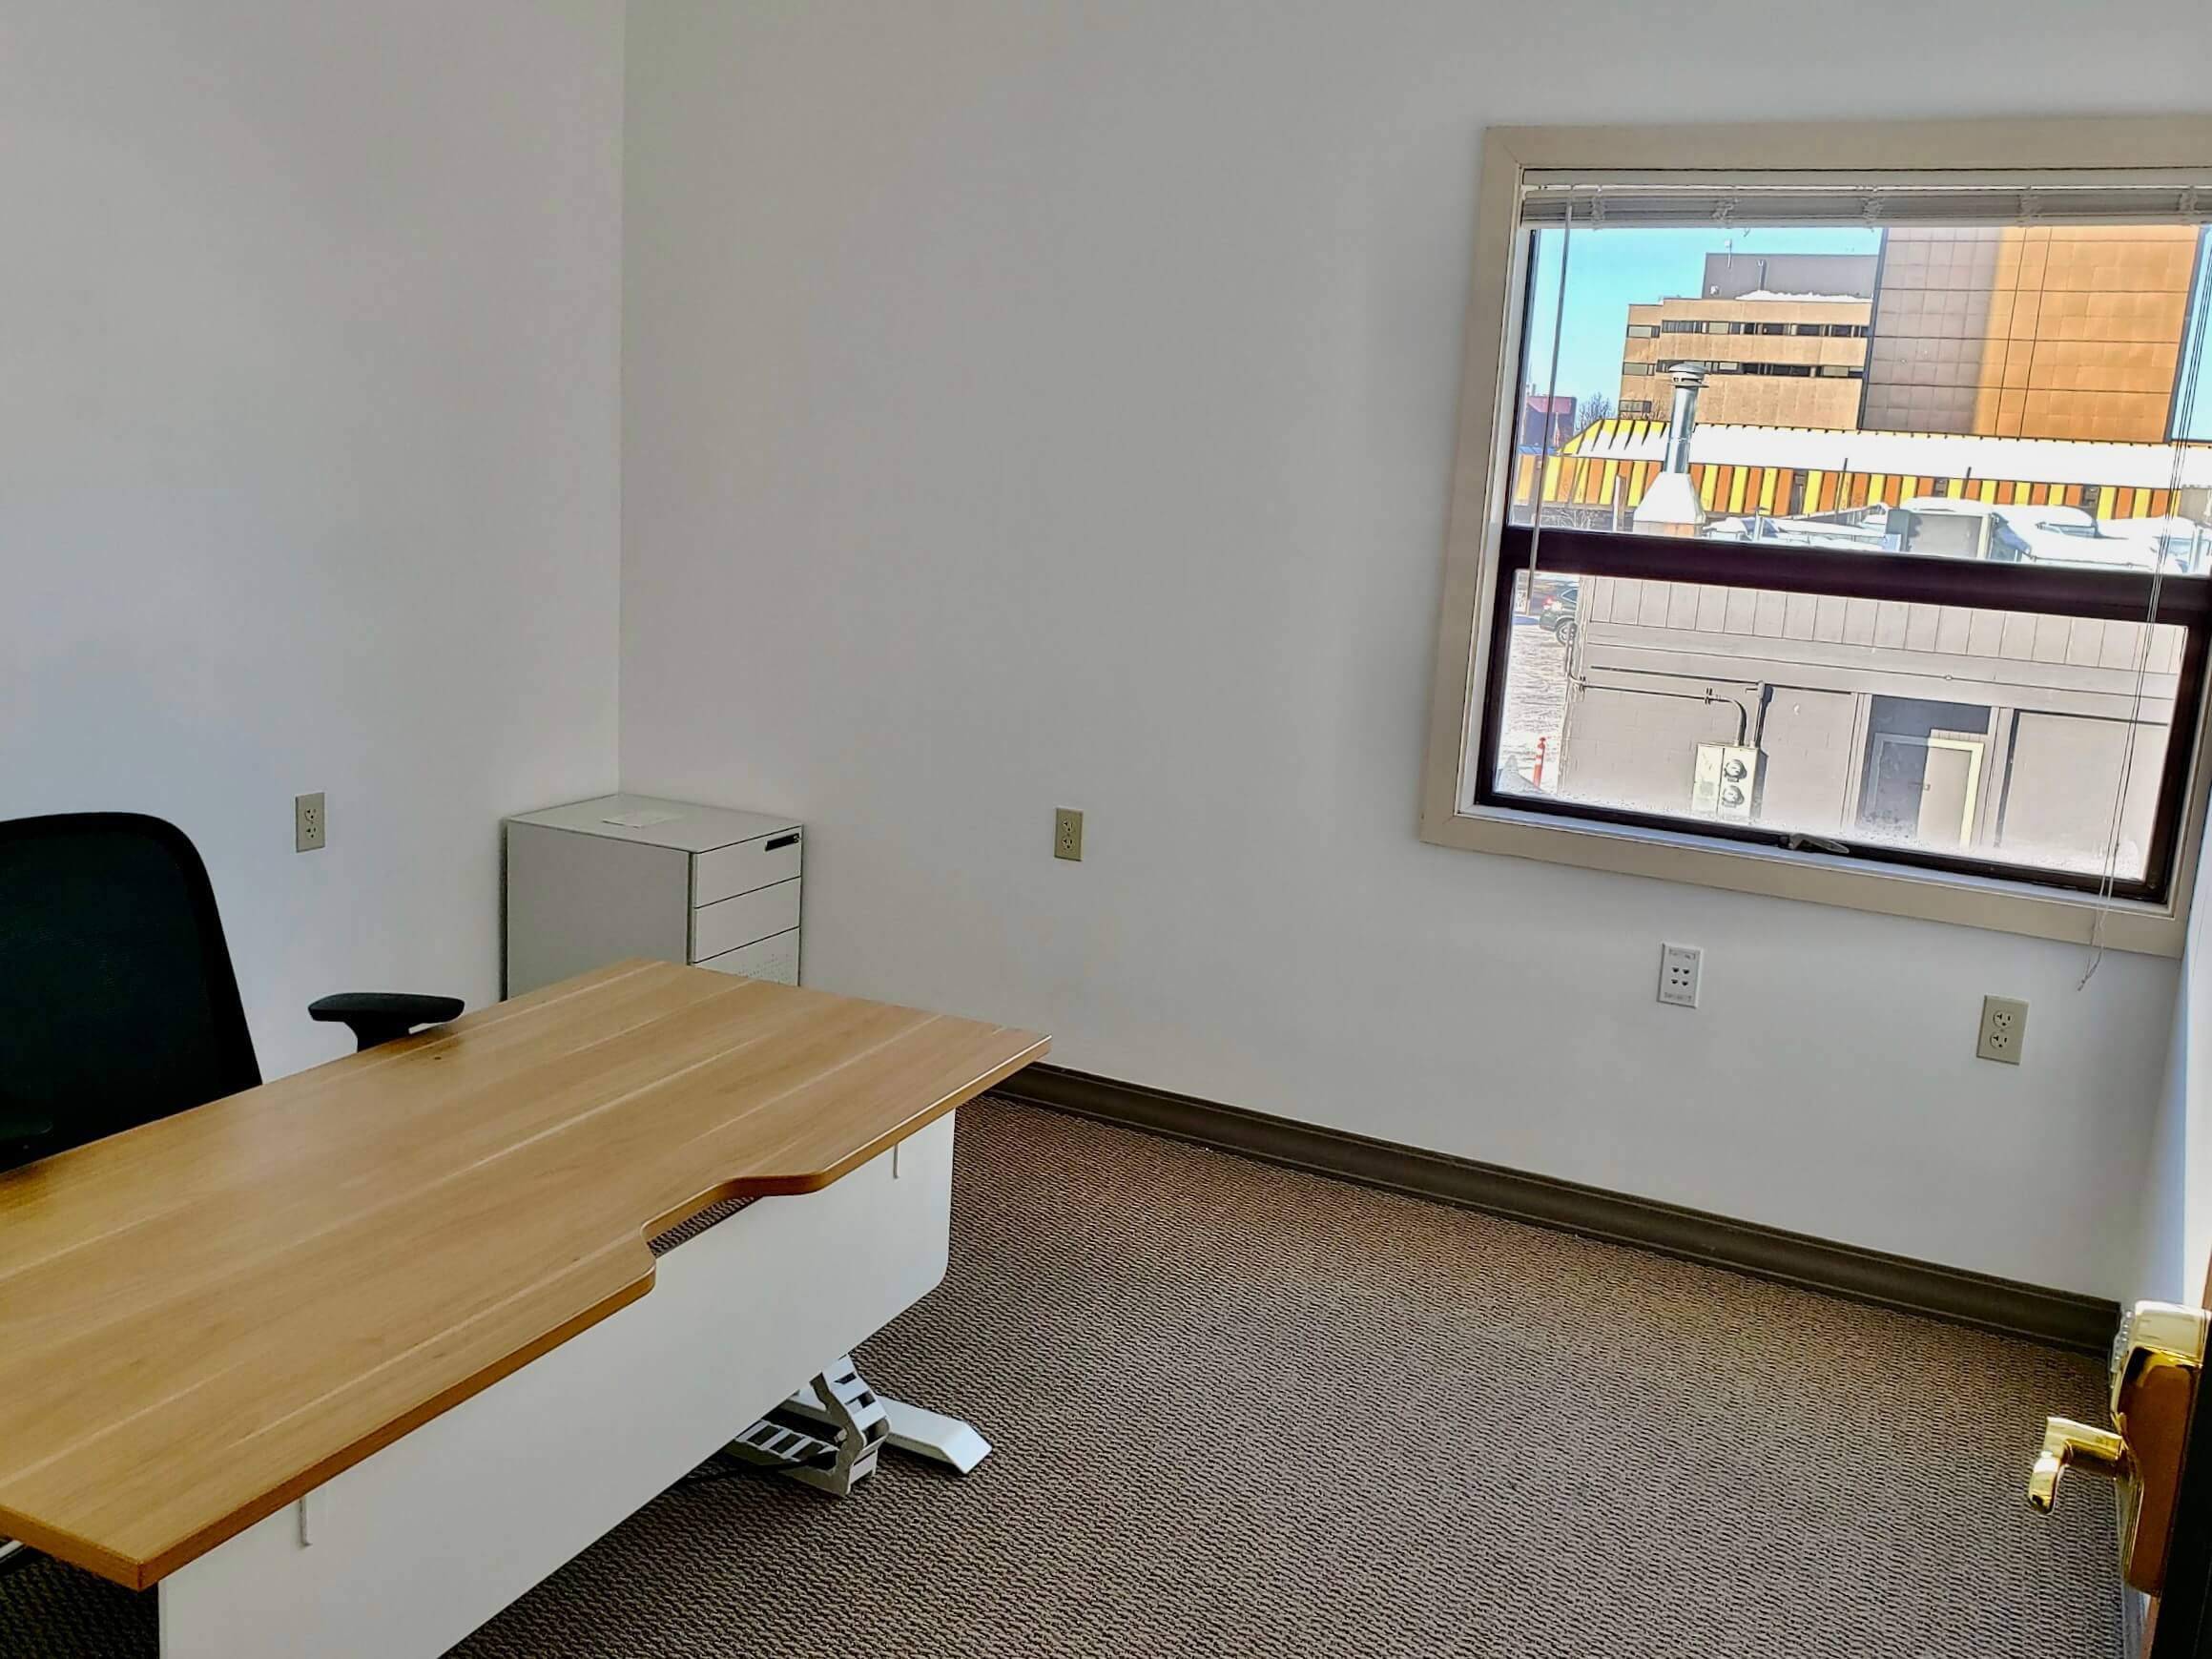 A coworking office at RSD Properties' Cowork By RSD Annex, with a desk, chair and filing cabinet on the left, and a window on the right showing a sunny Anchorage, Alaska day